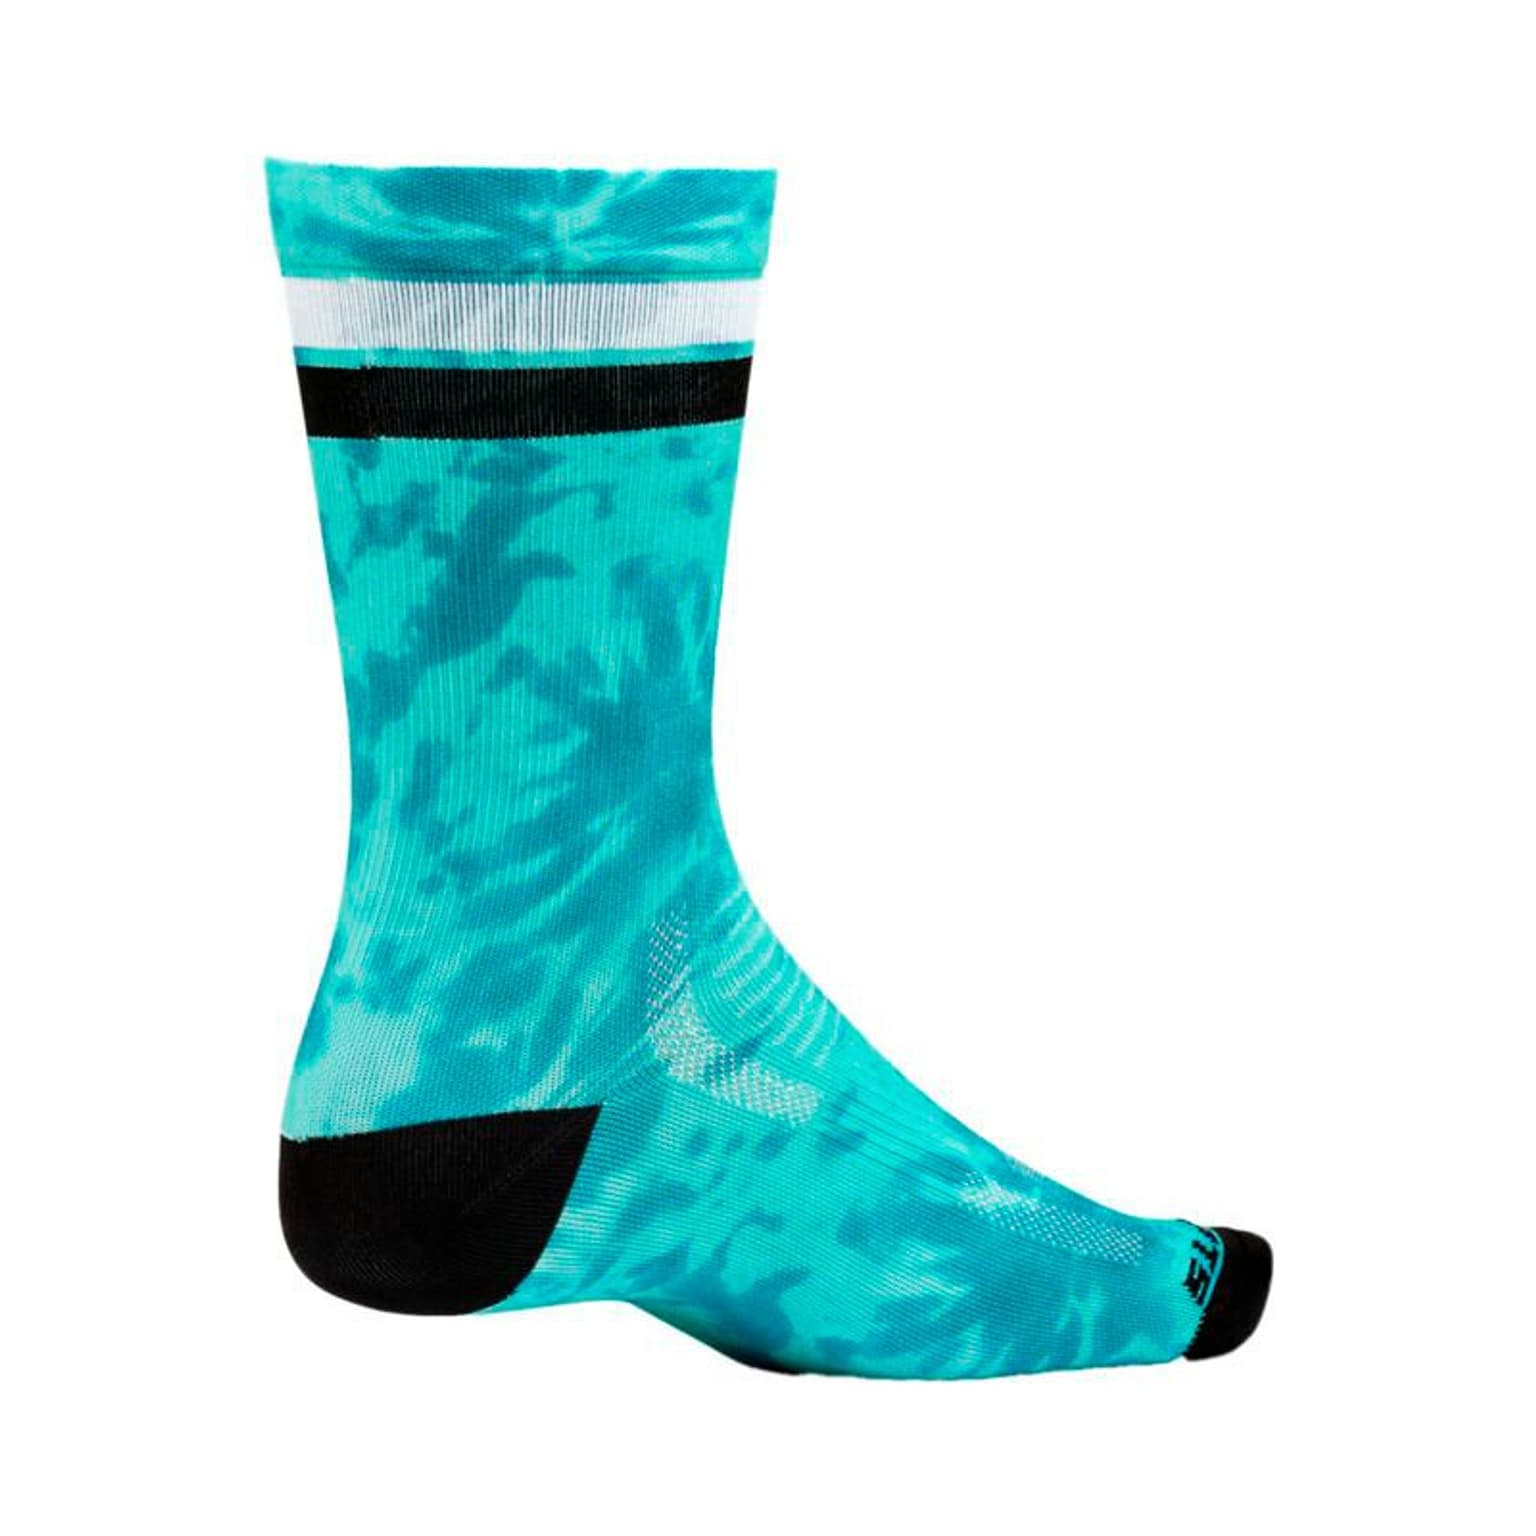 Ride Concepts Ride Concepts Alibi Synthetic Velosocken turquoise 2